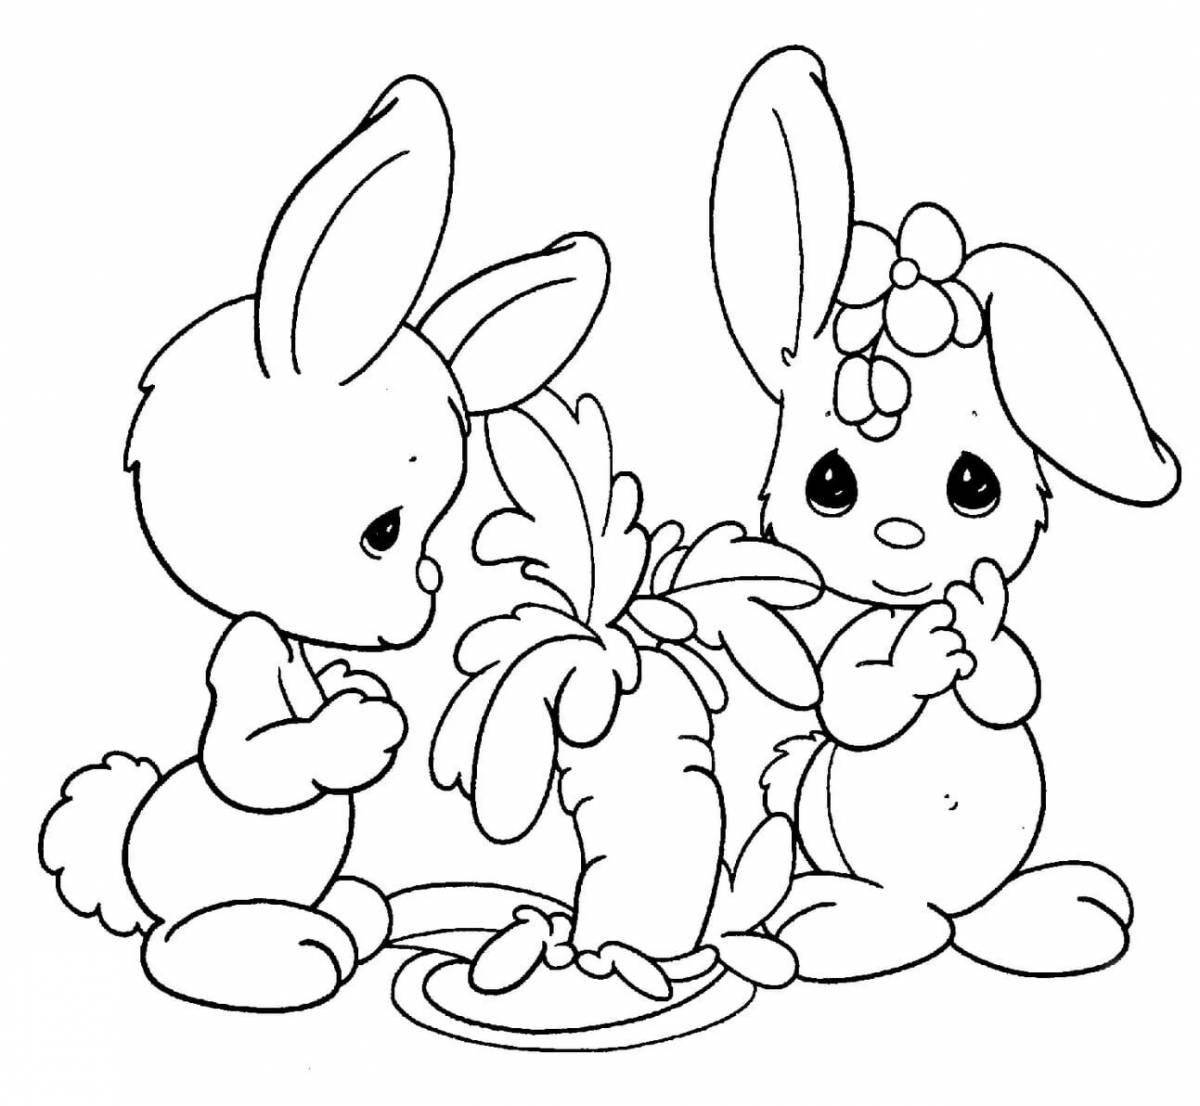 Amazing hare coloring pages for girls